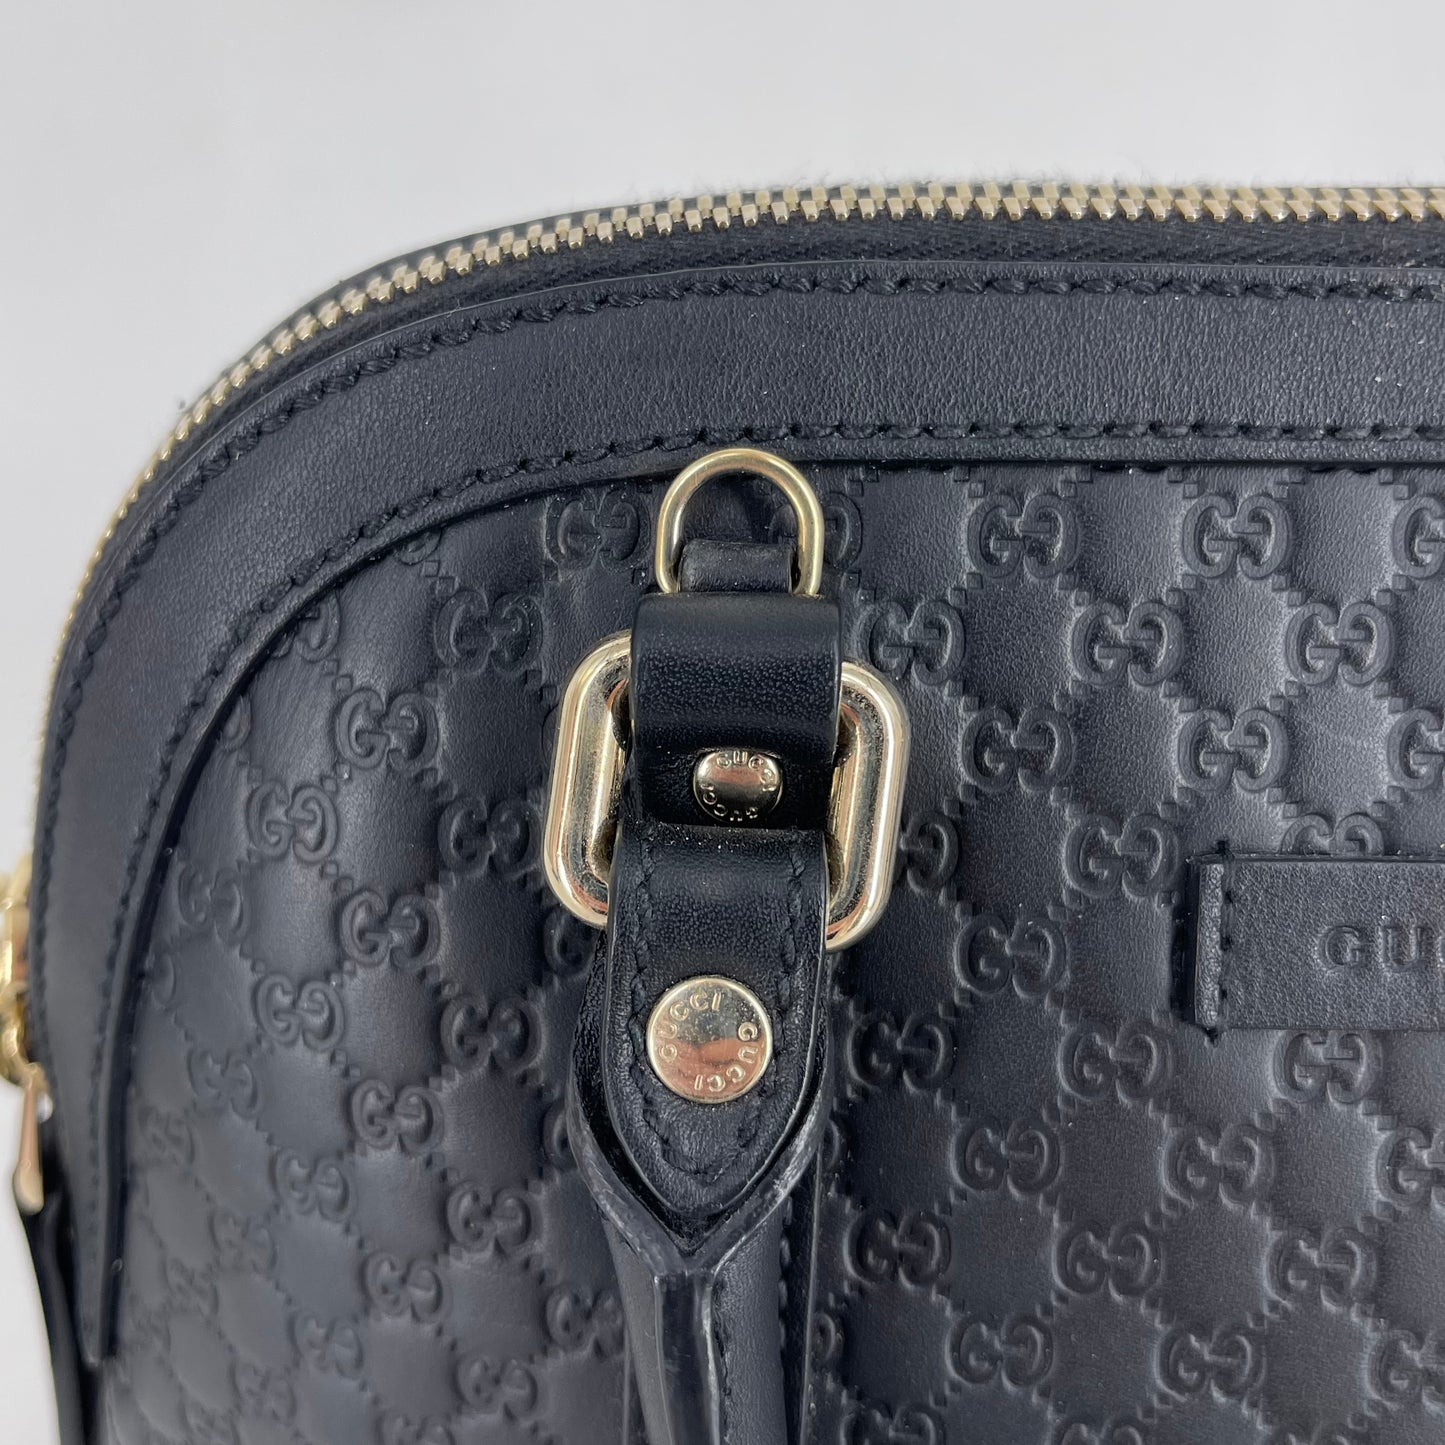 Authentic Gucci Black Leather Dome Bag